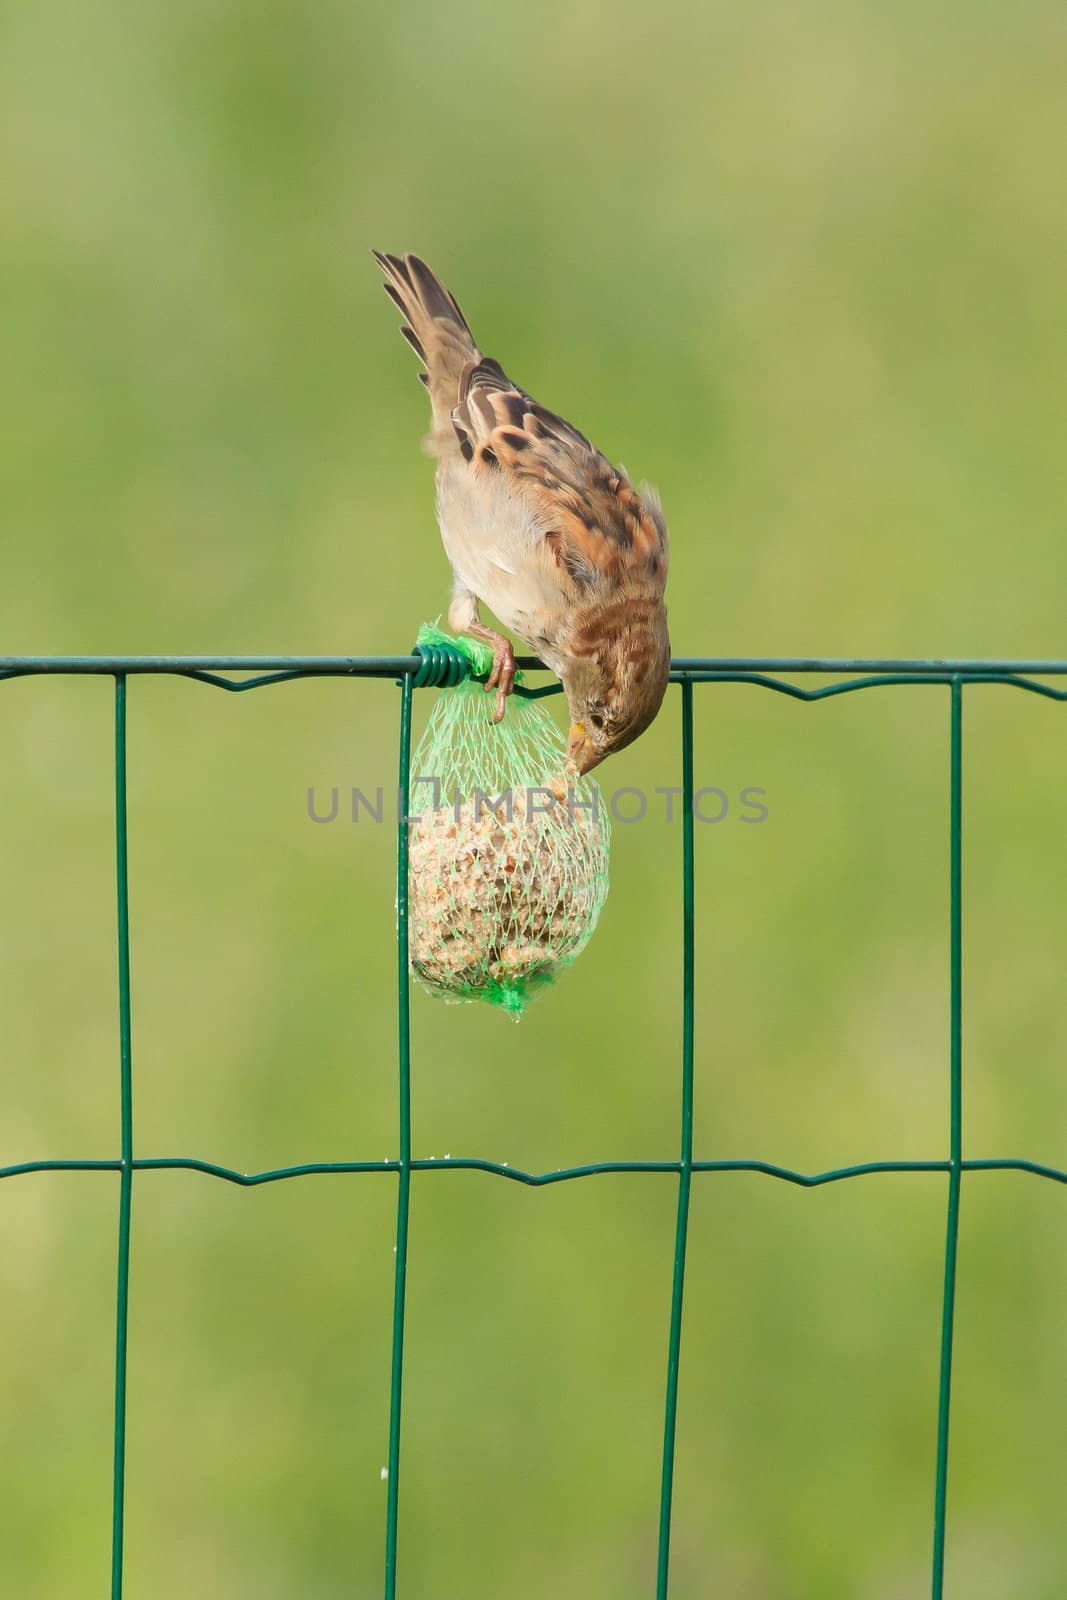 A sparrow is eating on a fence